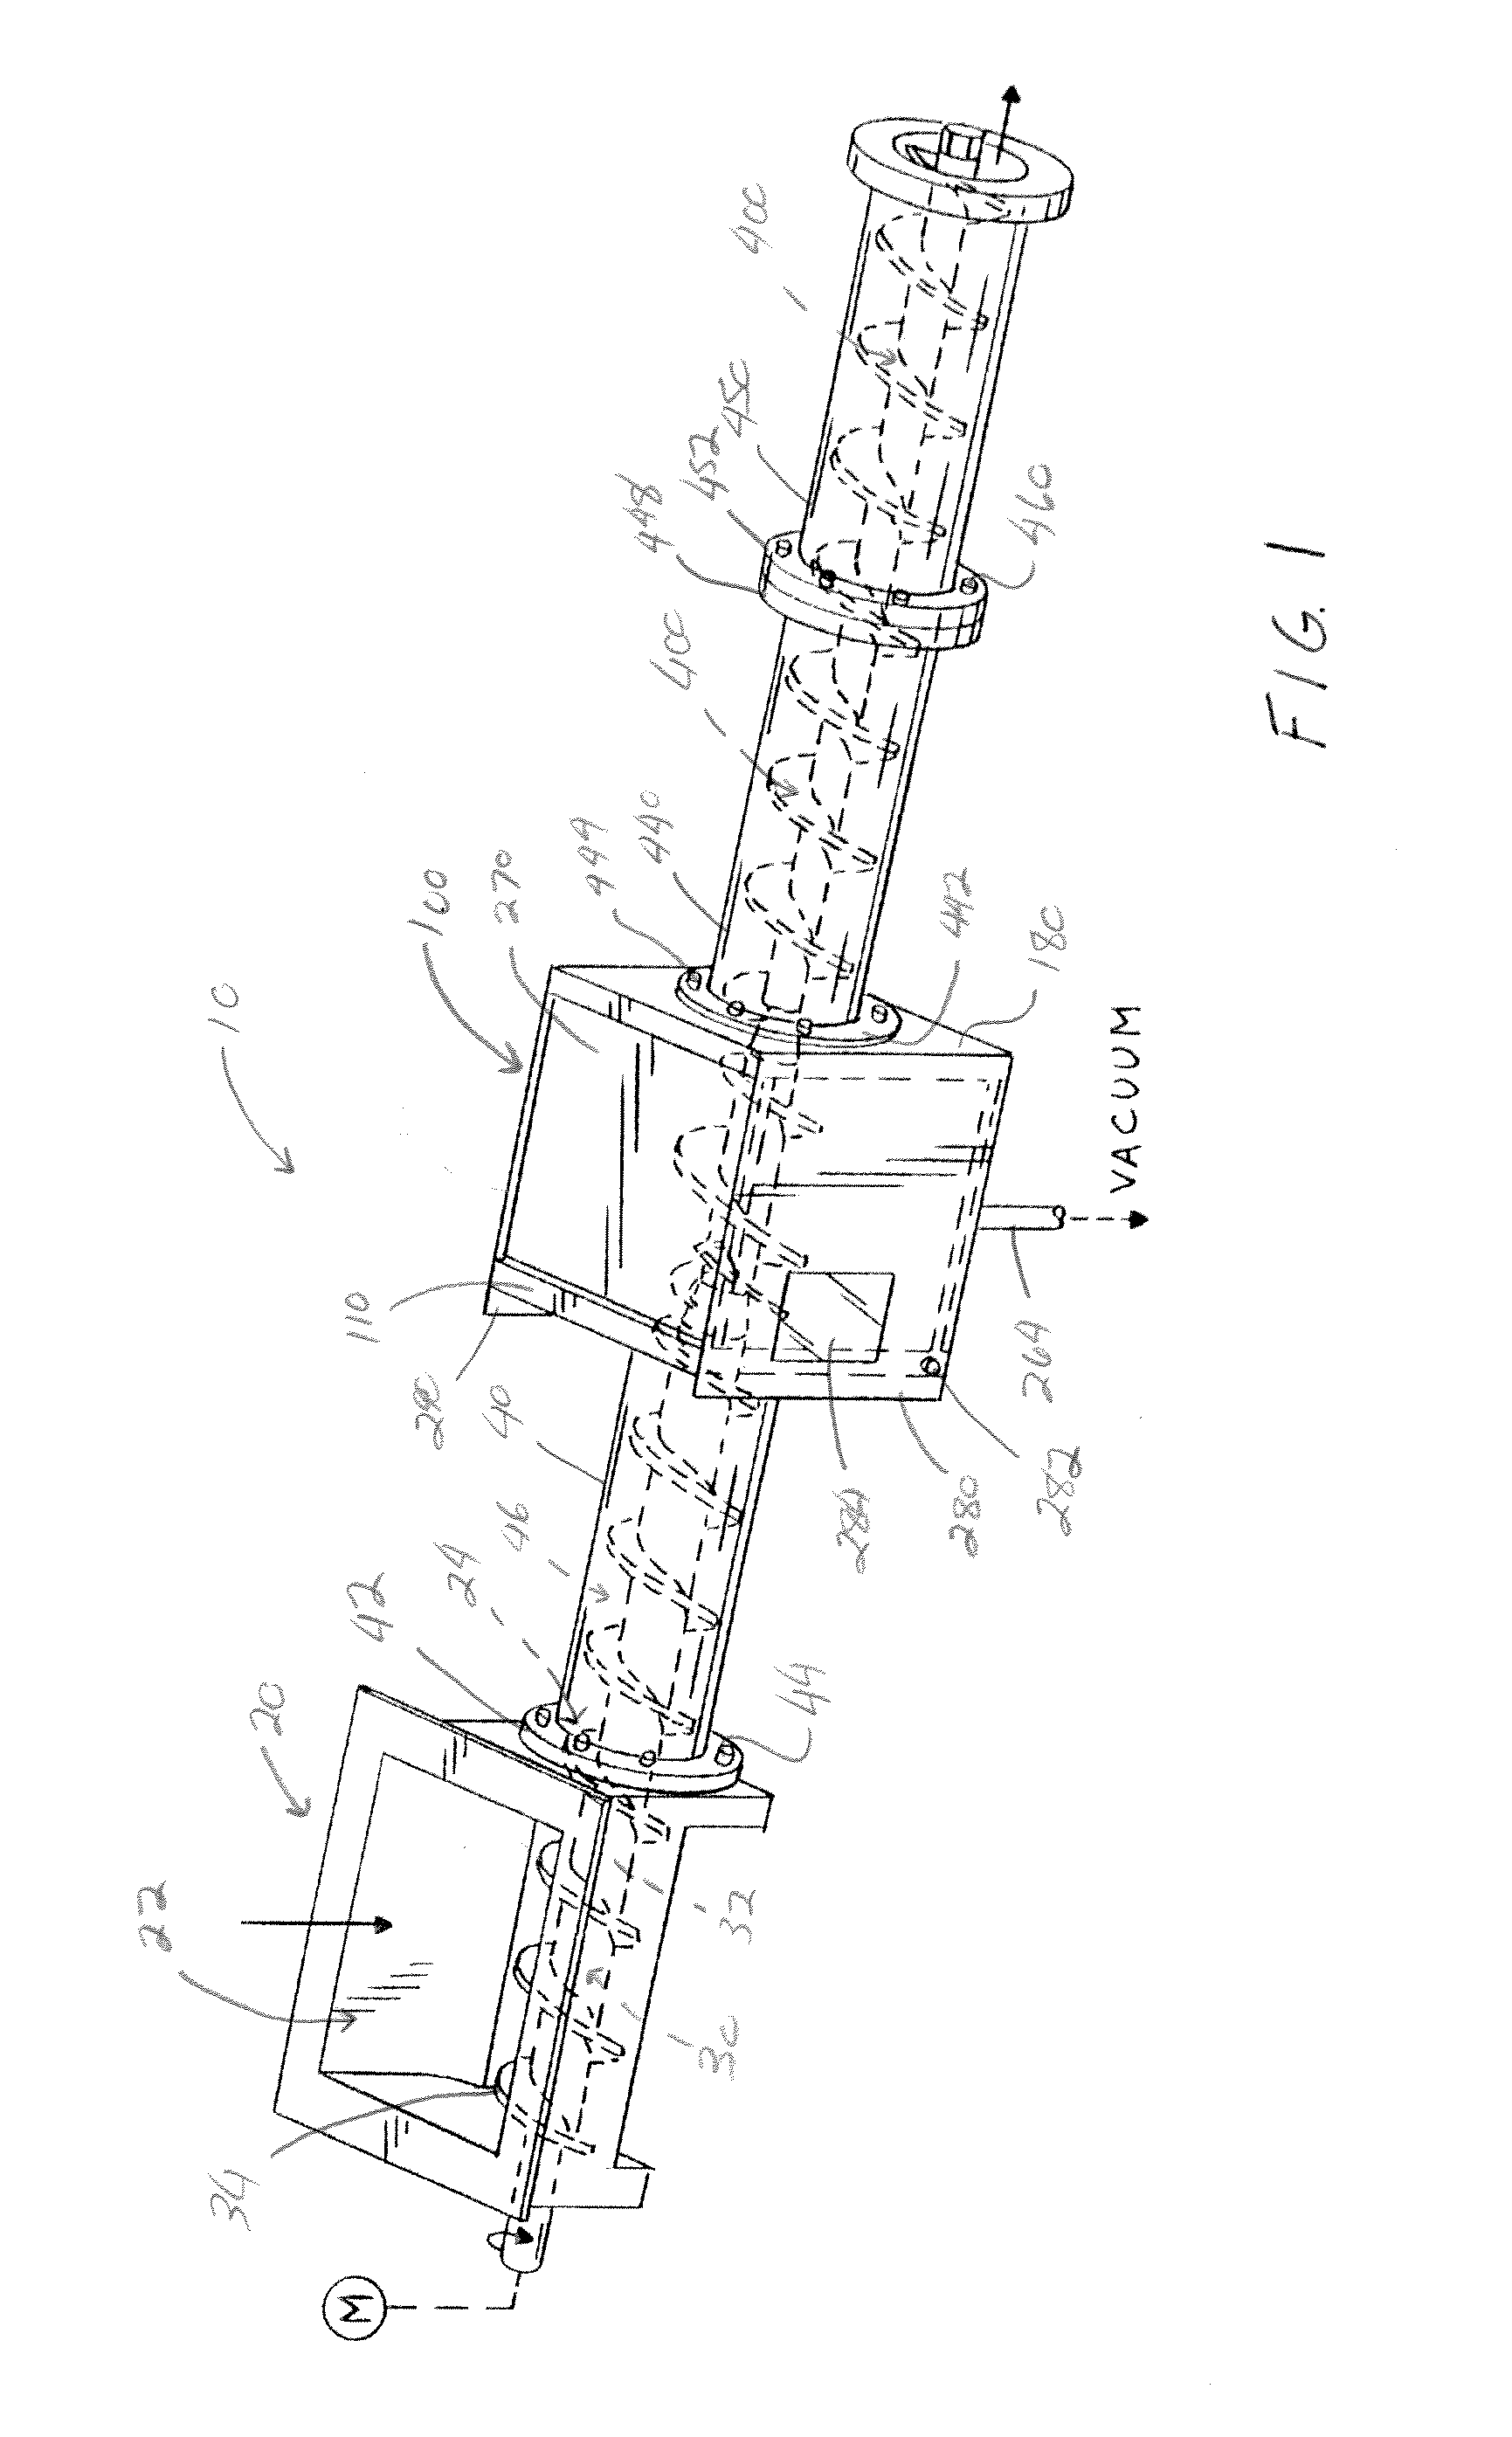 Apparatus and process for de-airing material in an extruder